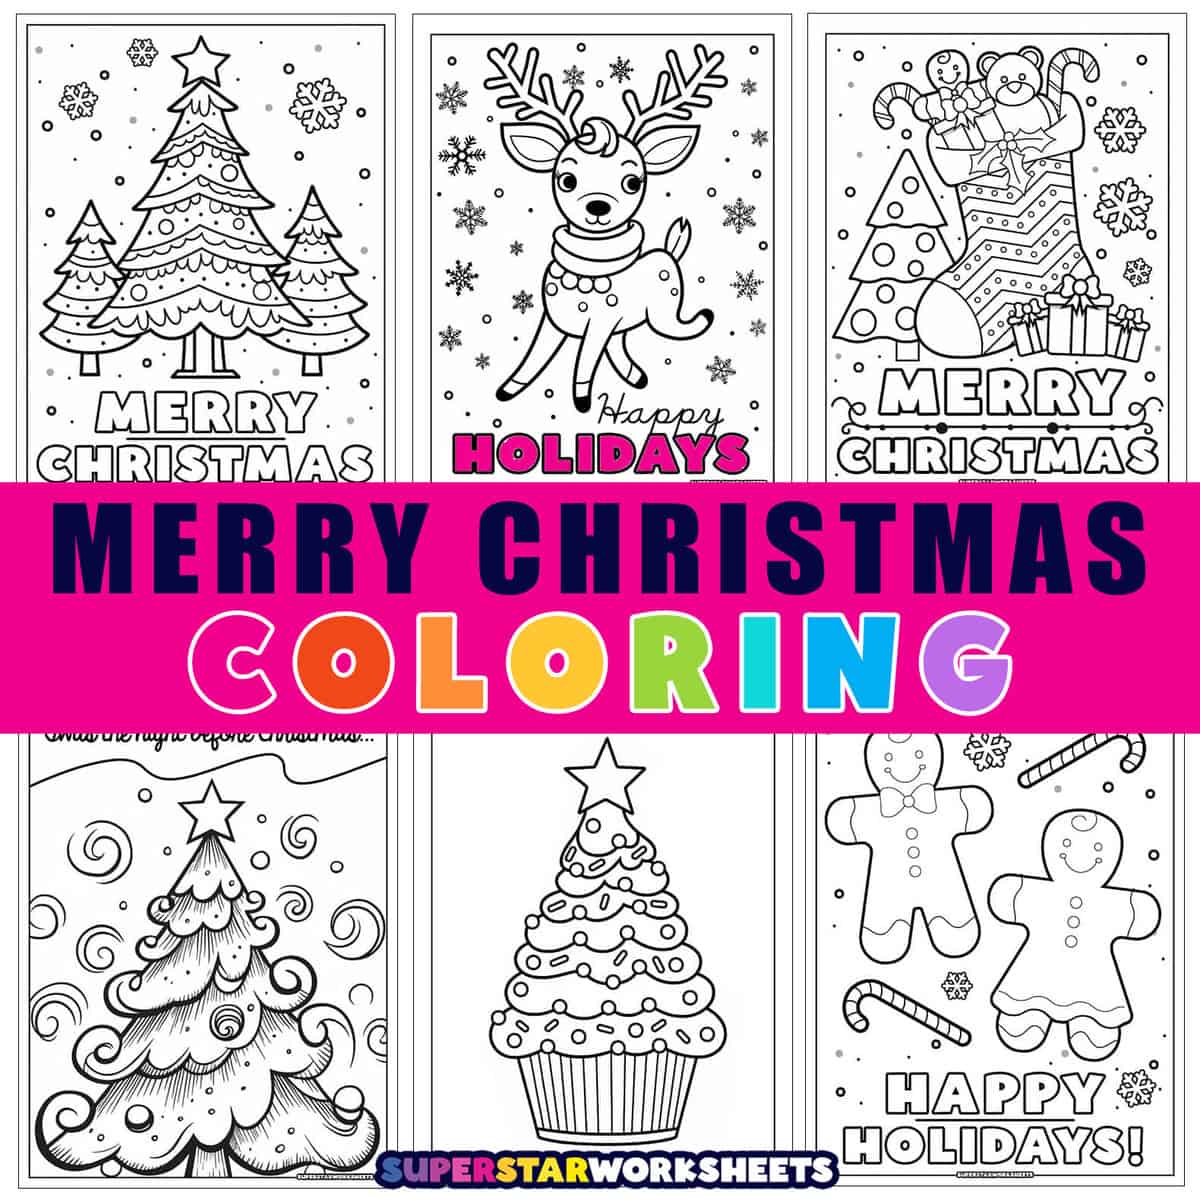 christmas patterns colored outlines